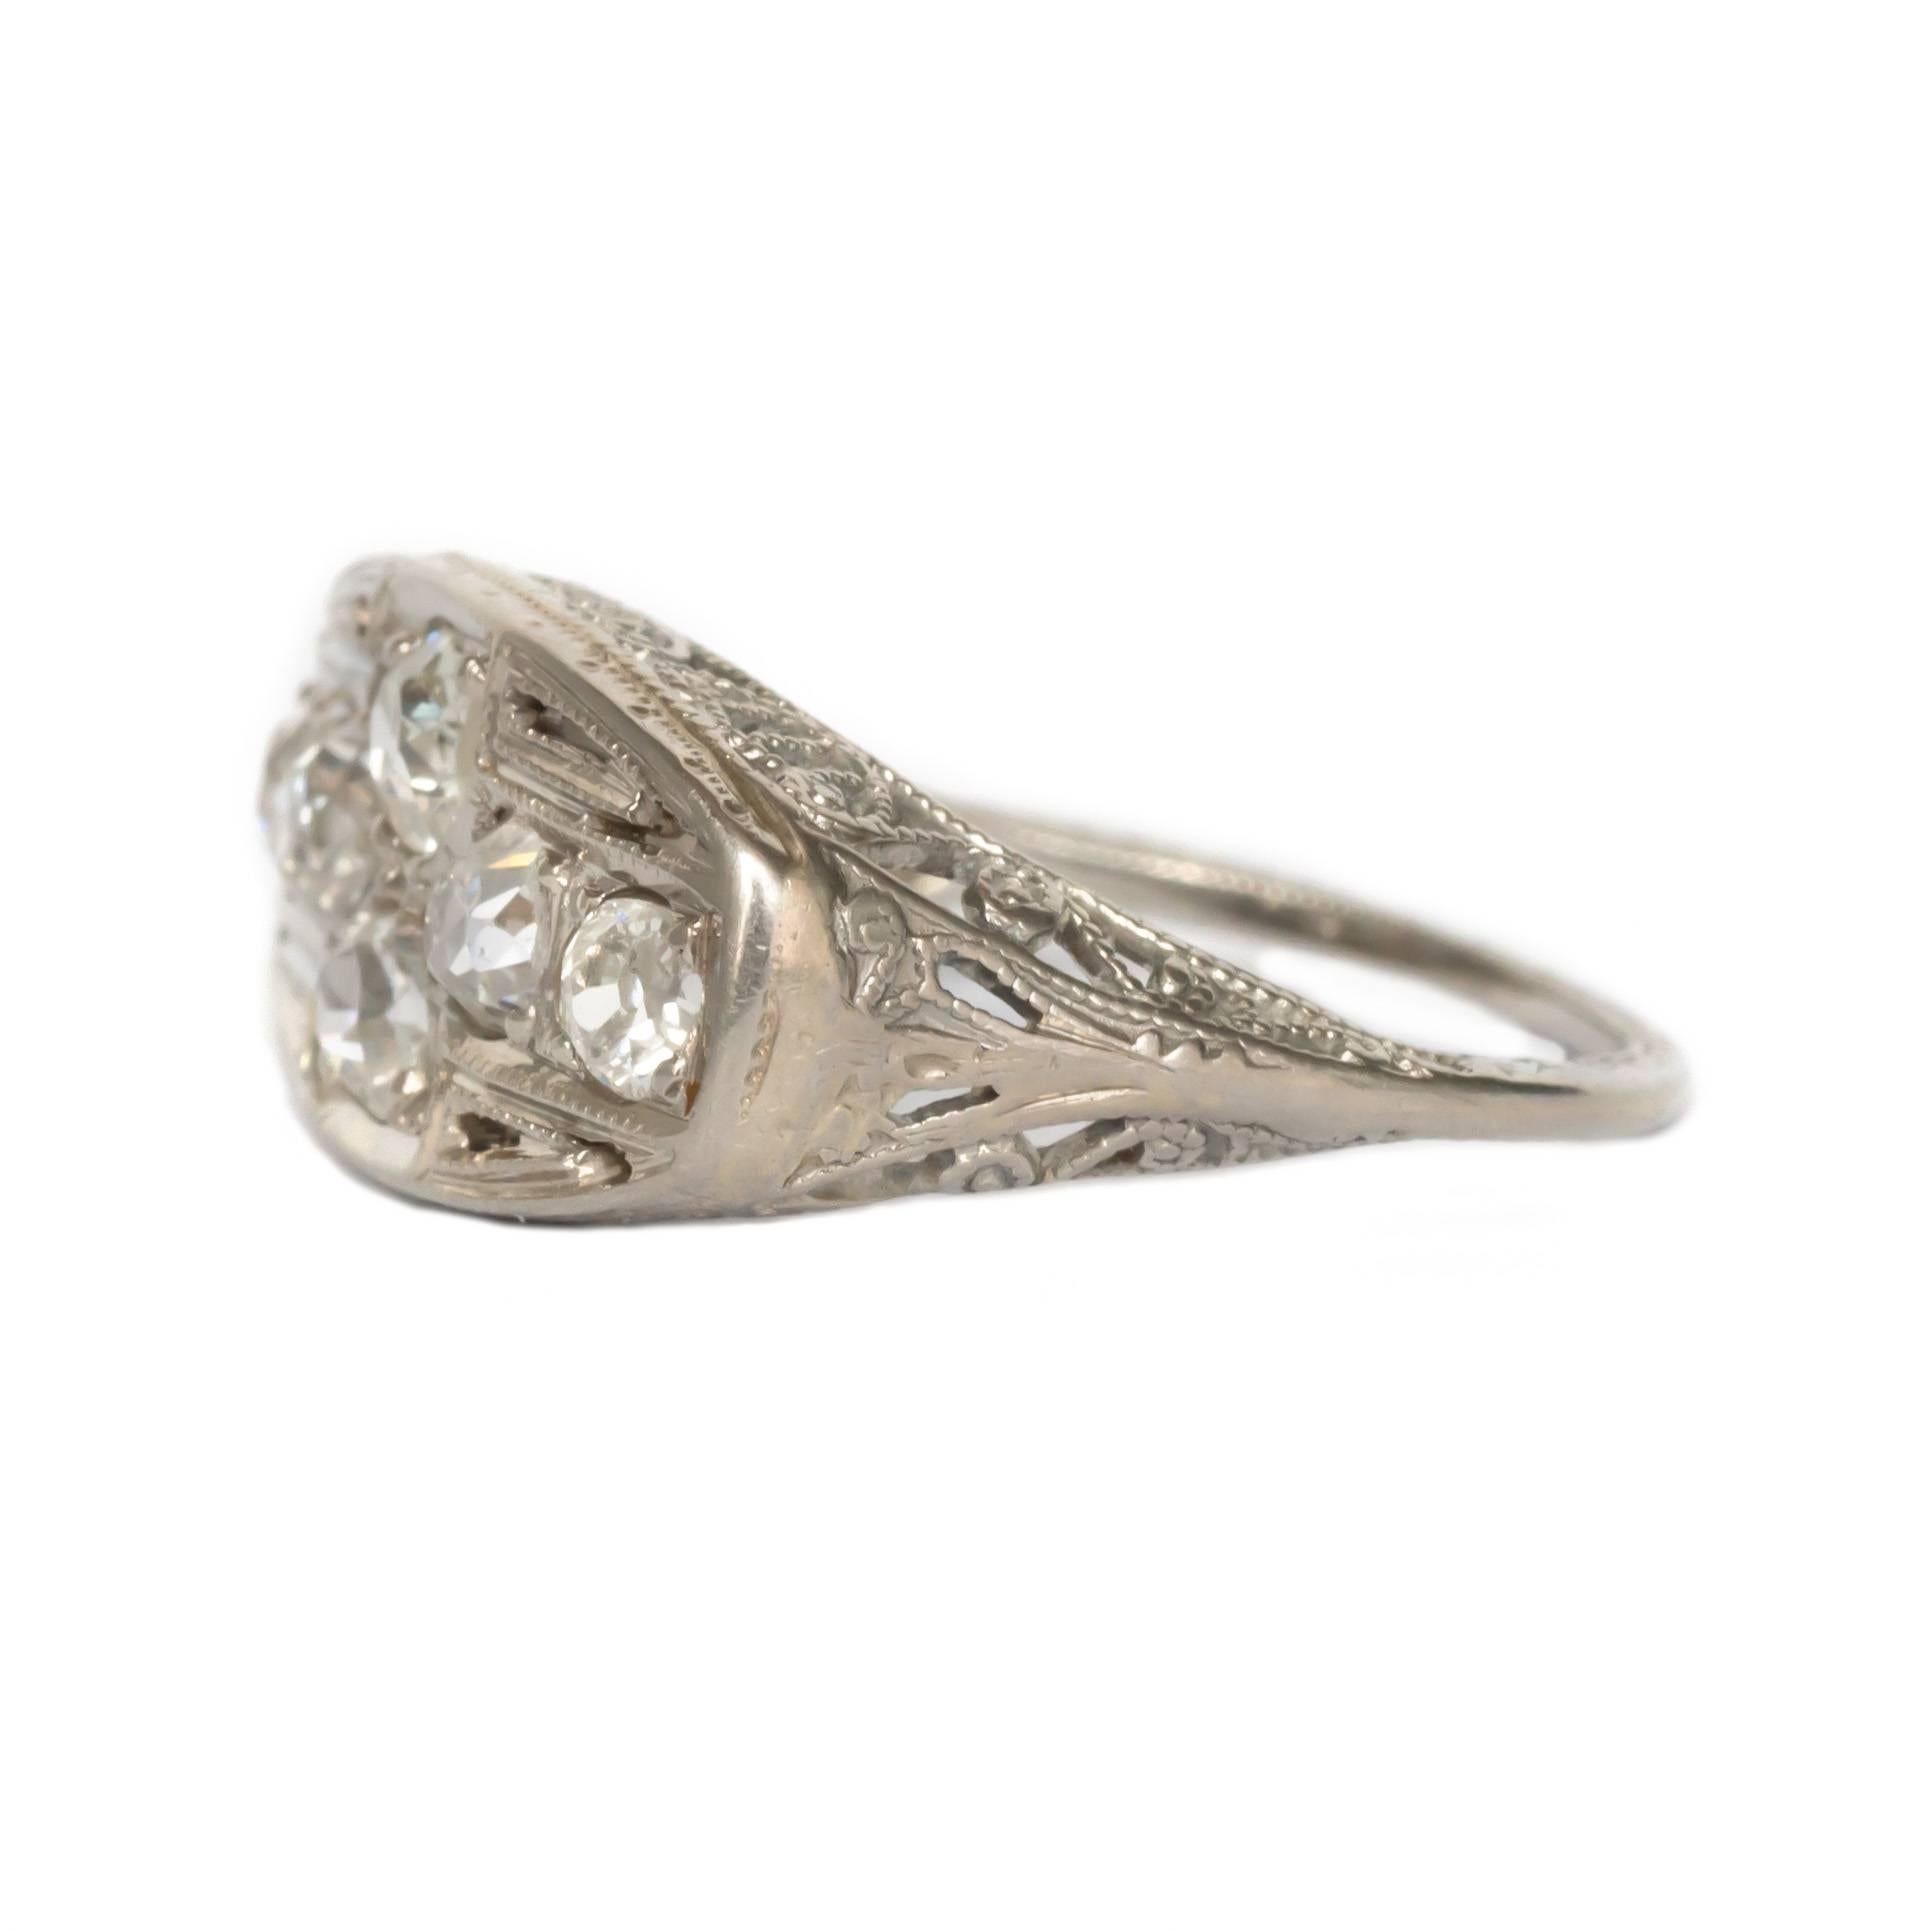 Item Details: 
Ring Size: 5.3
Metal Type: 18 Karat White Gold 
Weight: 3.4 grams

Side Stone Details: 
Shape: Old Mine Cushion
Total Carat Weight: 1.00 carat total weight
Color: I
Clarity: VS

Finger to Top of Stone Measurement: 5.04mm